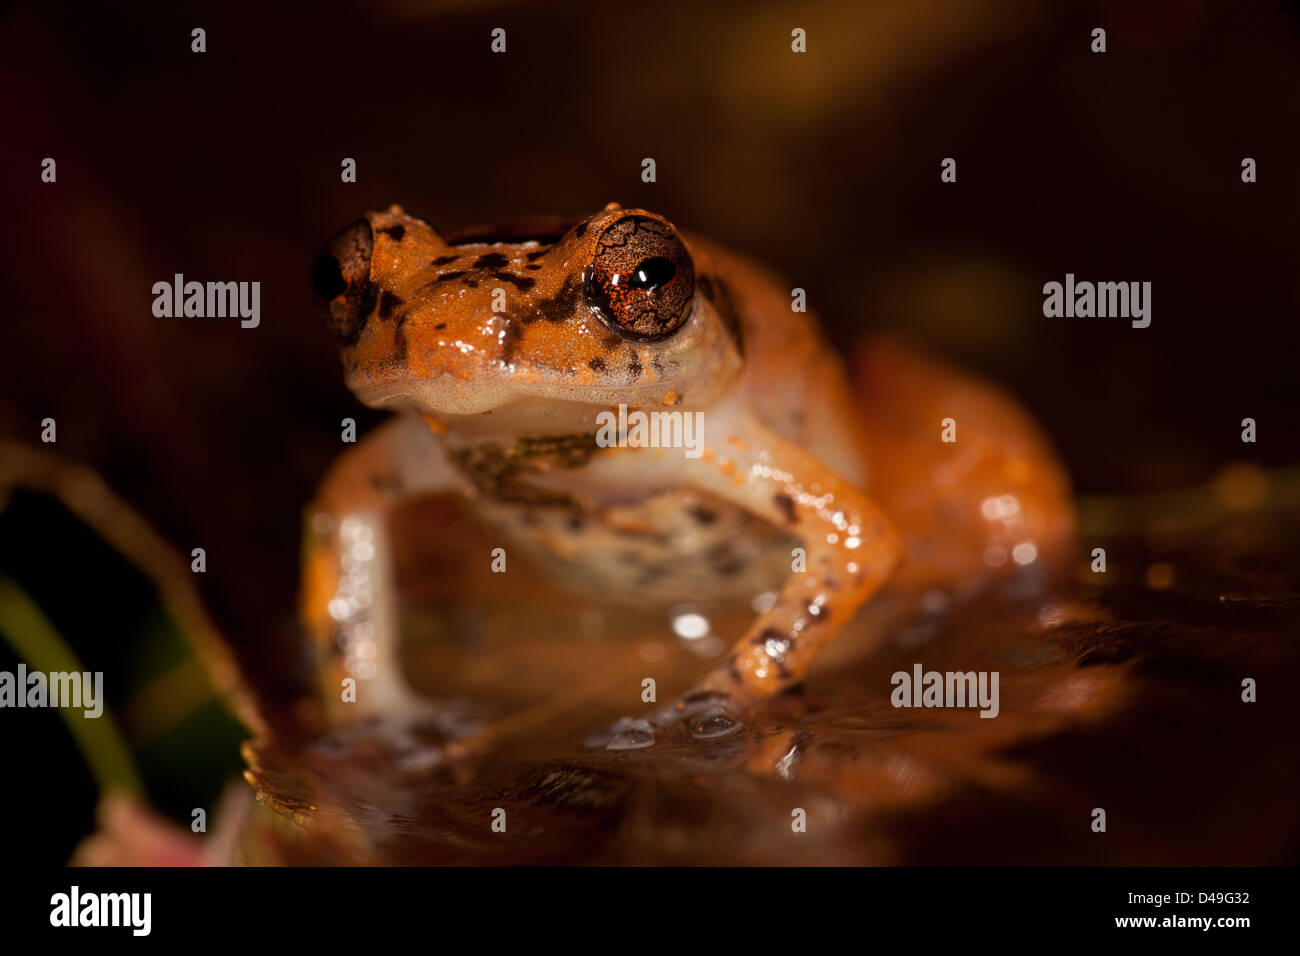 Frog at nighttime in the rainforest at Burbayar nature reserve, Panama province, Republic of Panama. Stock Photo